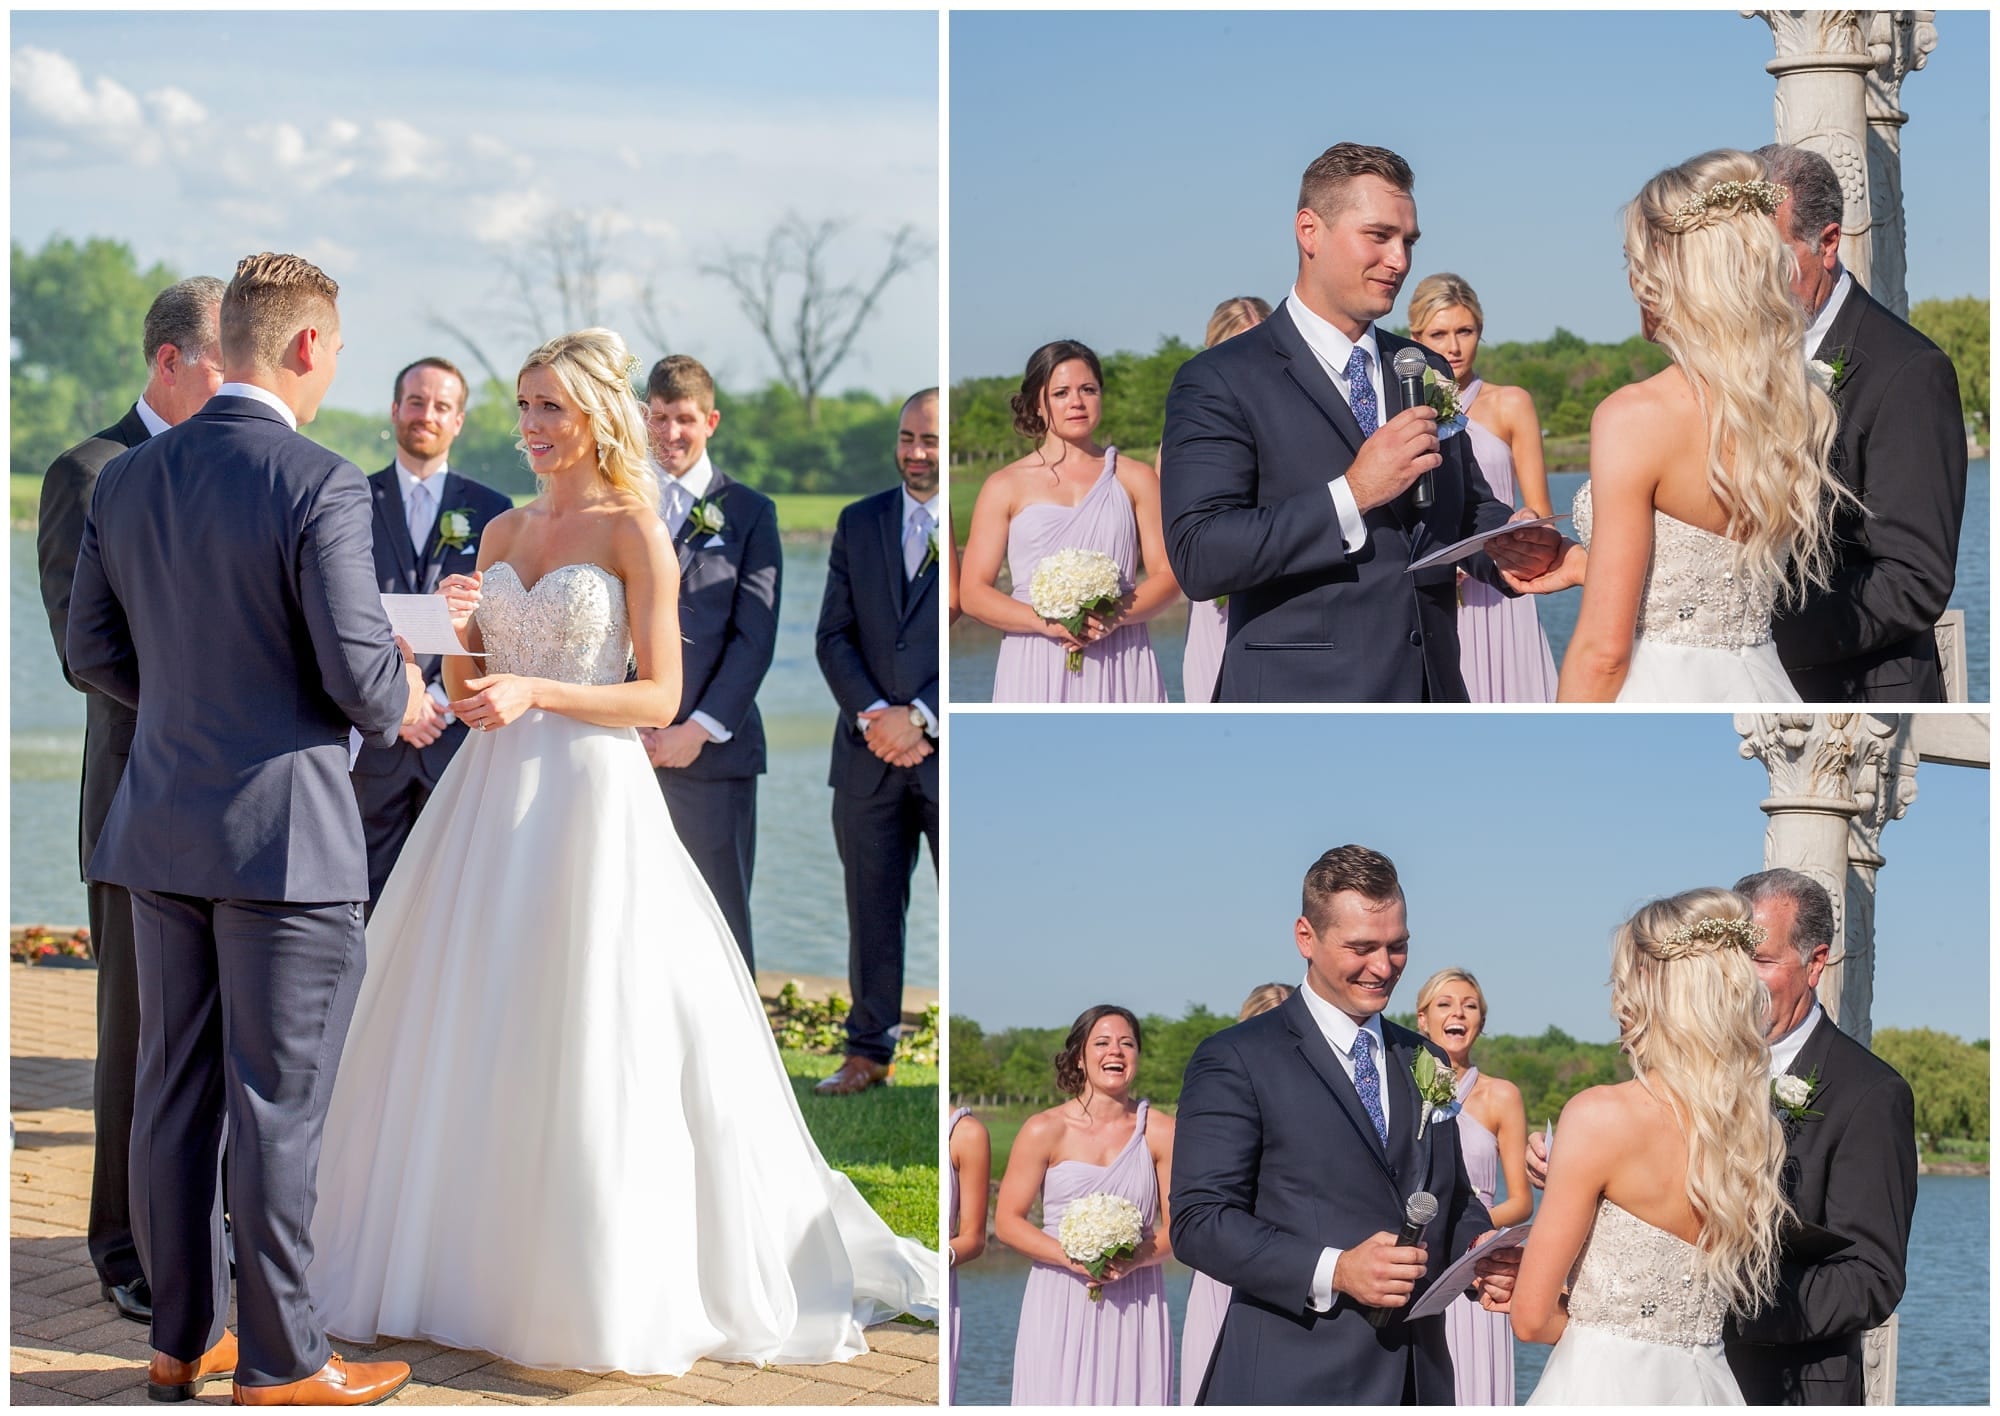 Odyessy_Country_Club_Tinley_Park_Wedding_Photographer_Laura_Meyer_Photography_2015